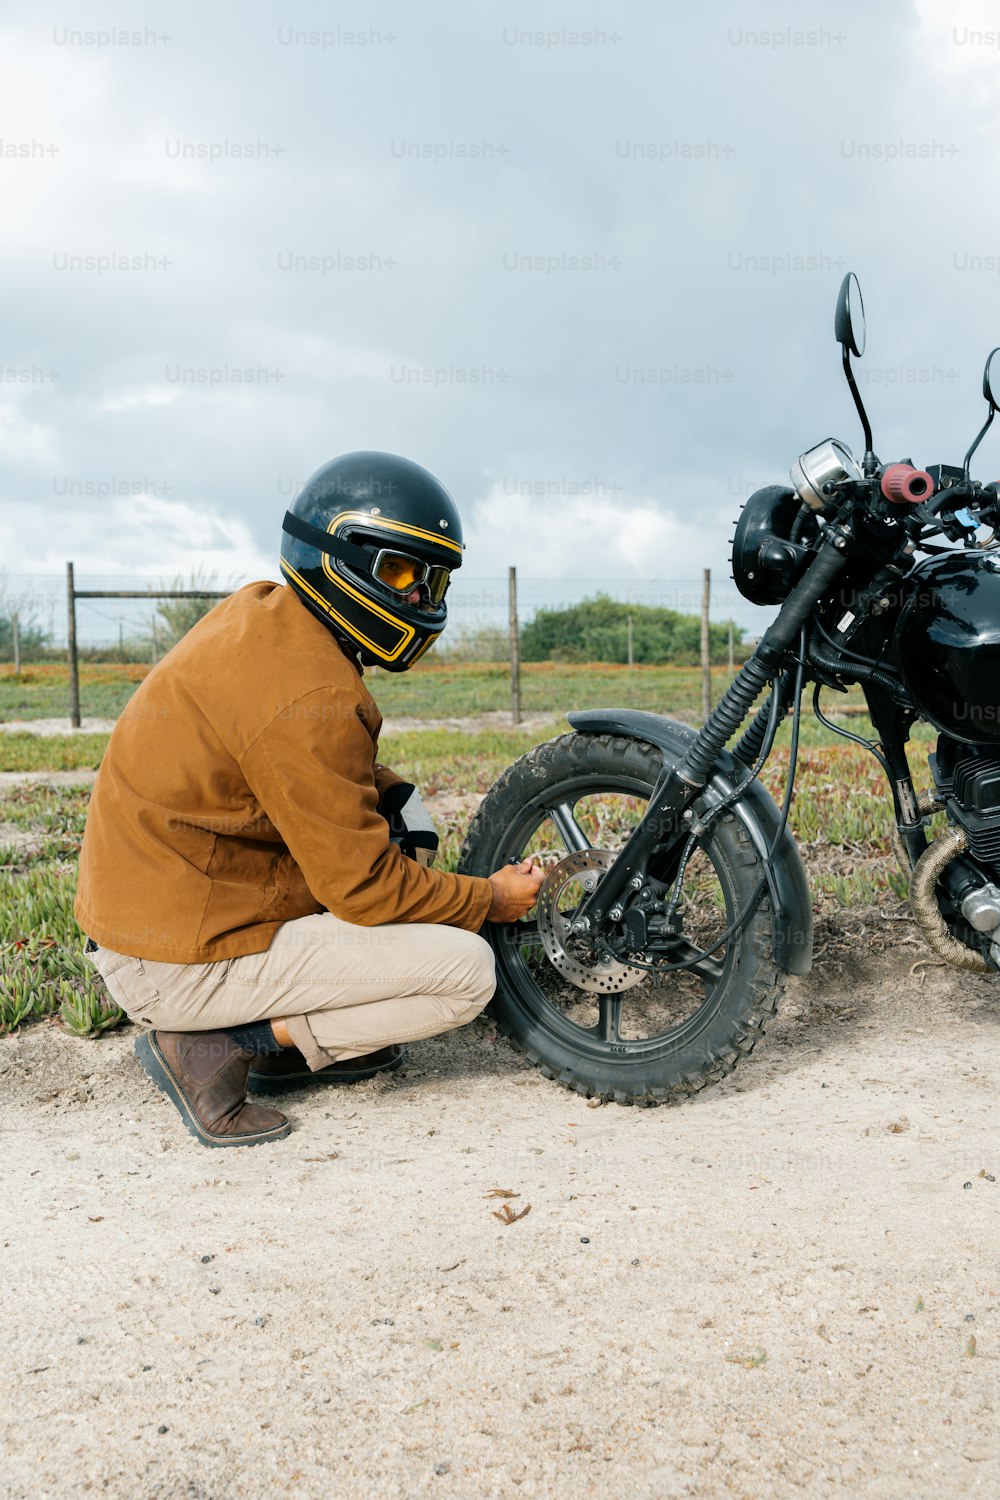 a man kneeling down next to a motorcycle